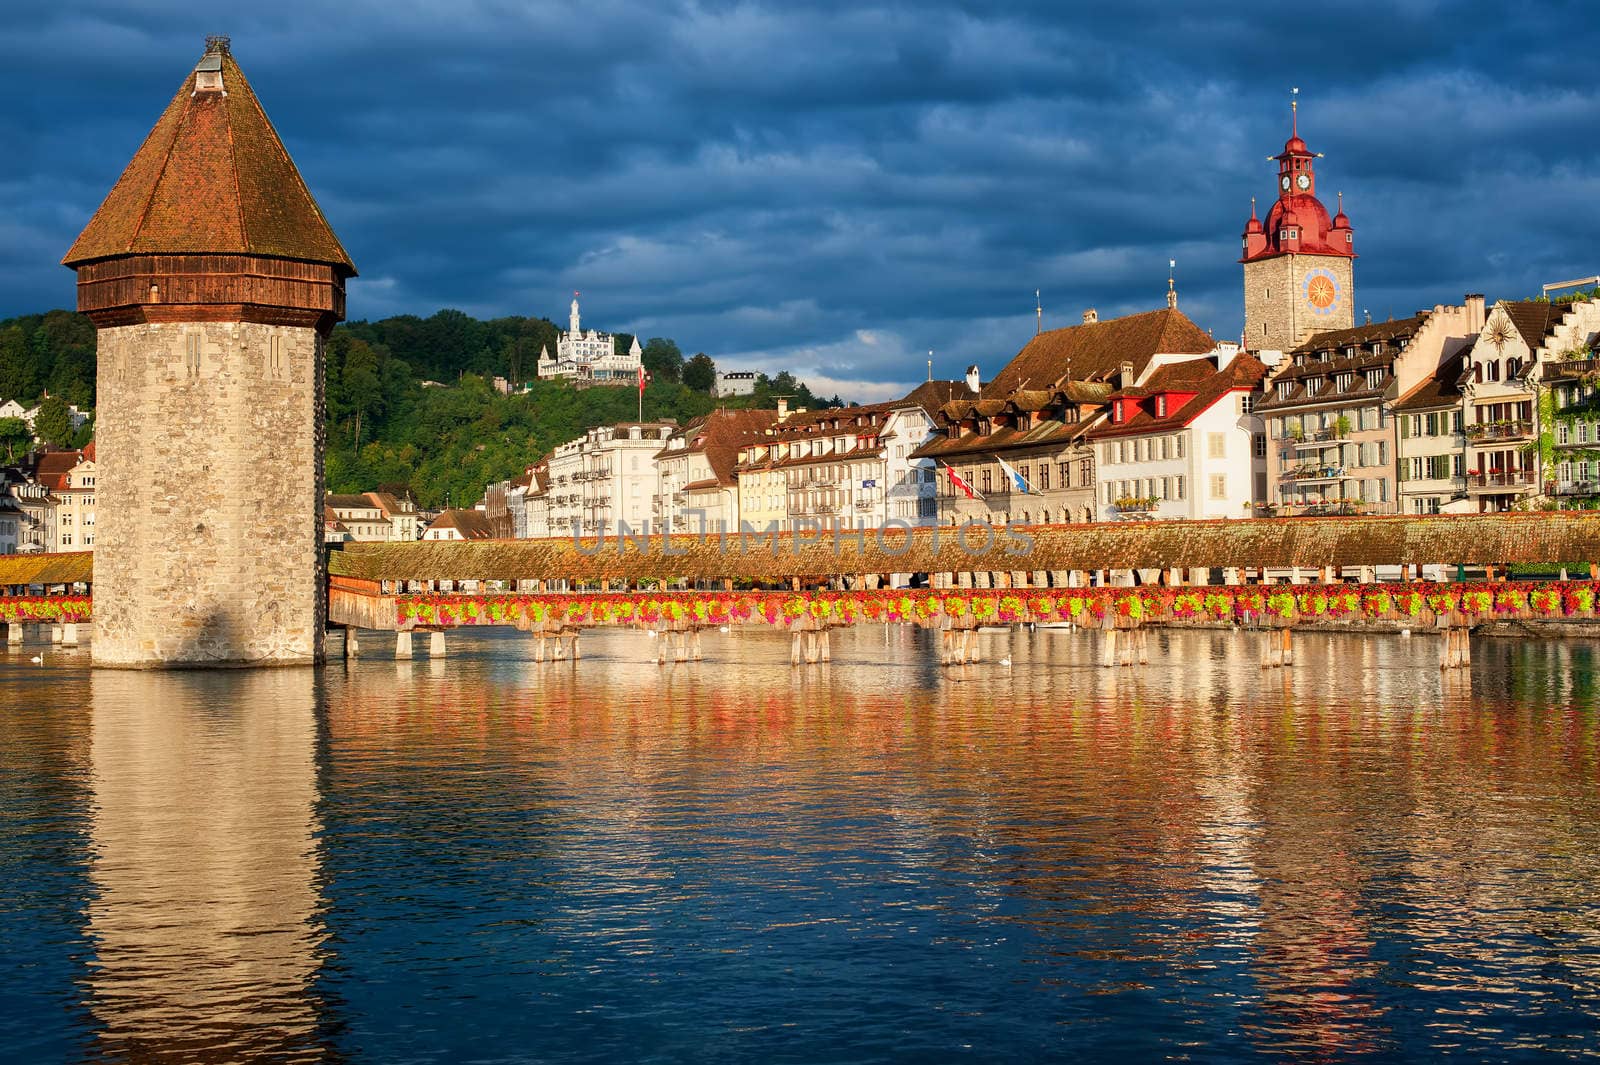 Lucerne, Switzerland, view over the old town with Chapel Bridge, Water Tower, Gutsch palace